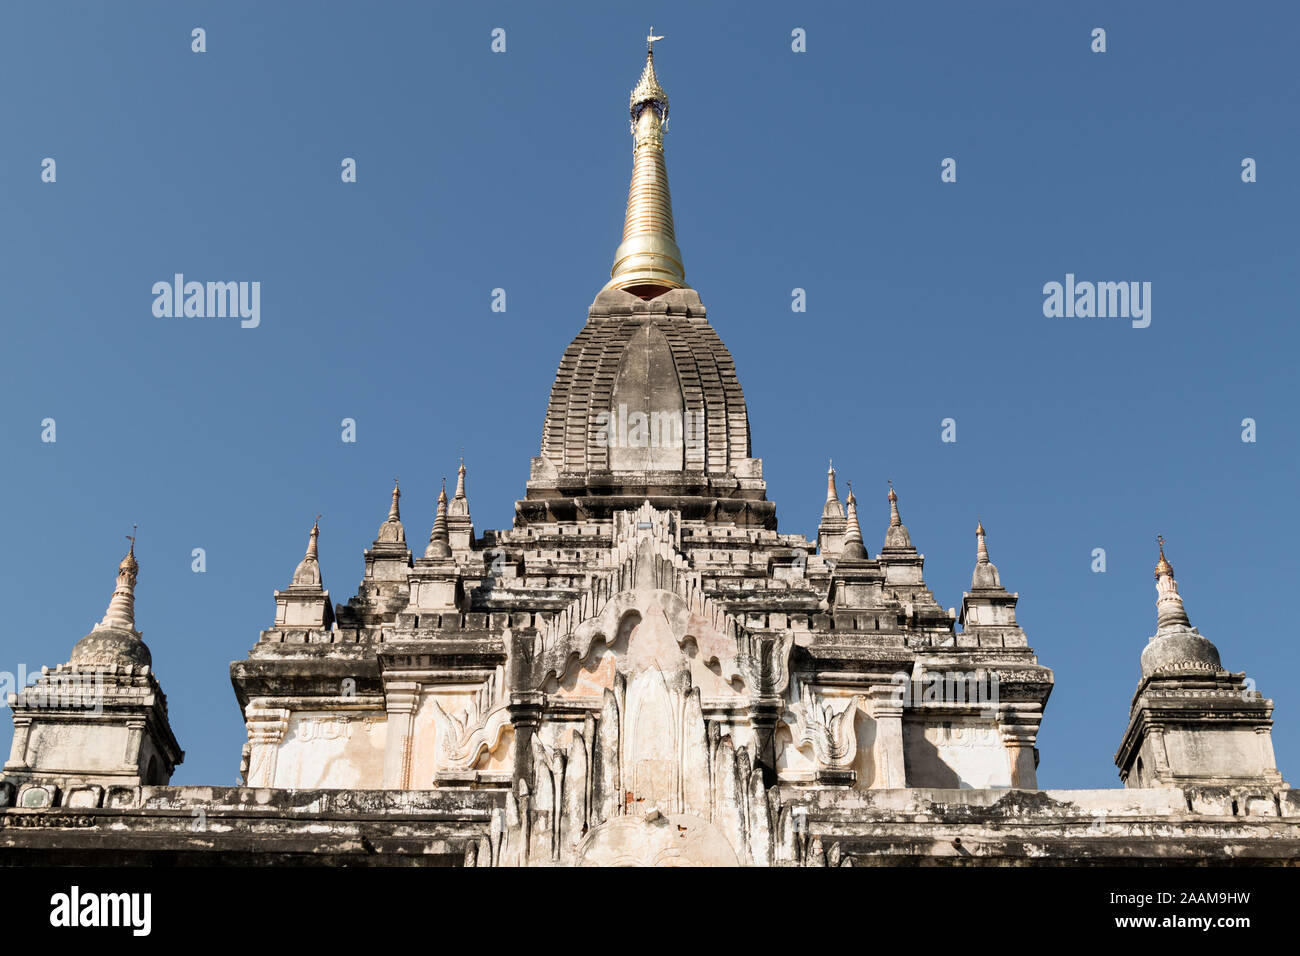 Roof detail of Gawdawpalin Temple in Bagan archaeological zone. This is a famous buddhist temple, built in the mid-12th century. Stock Photo